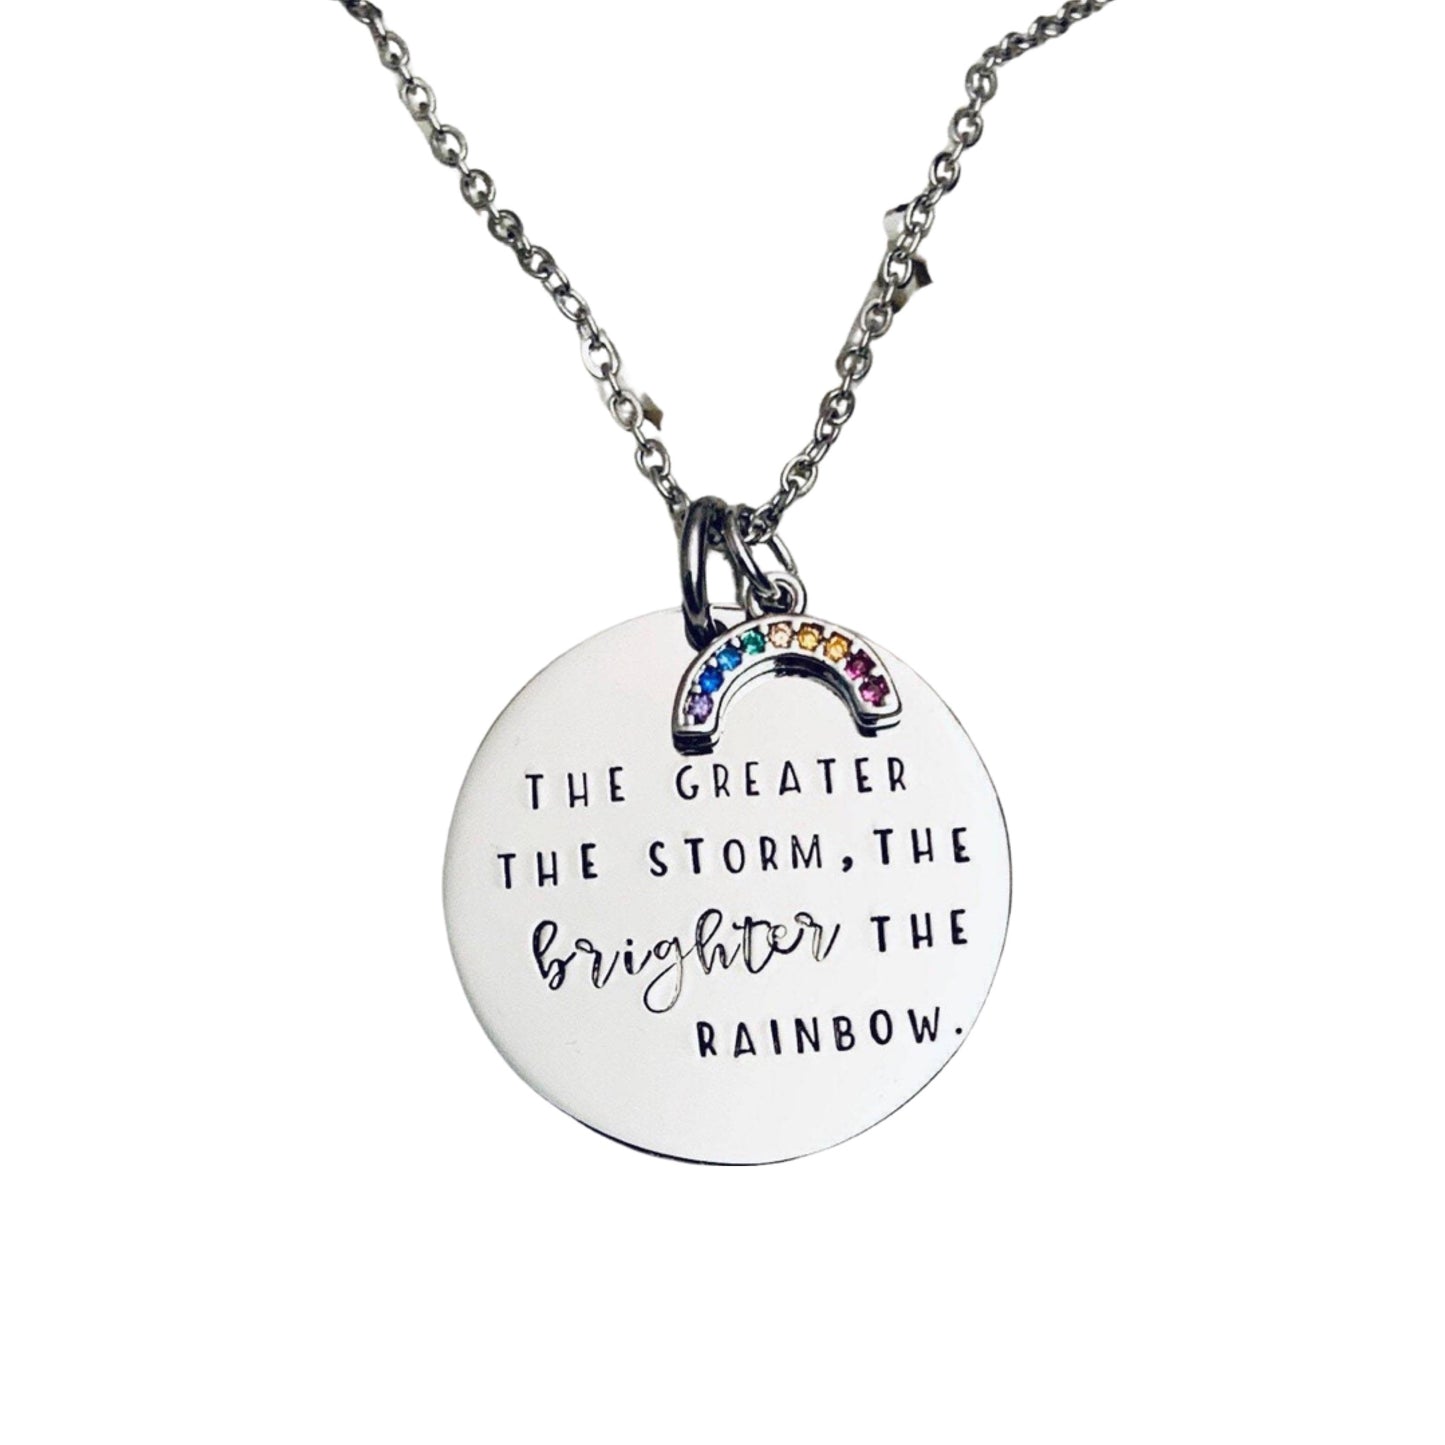 The greater the storm, the brighter the rainbow necklace